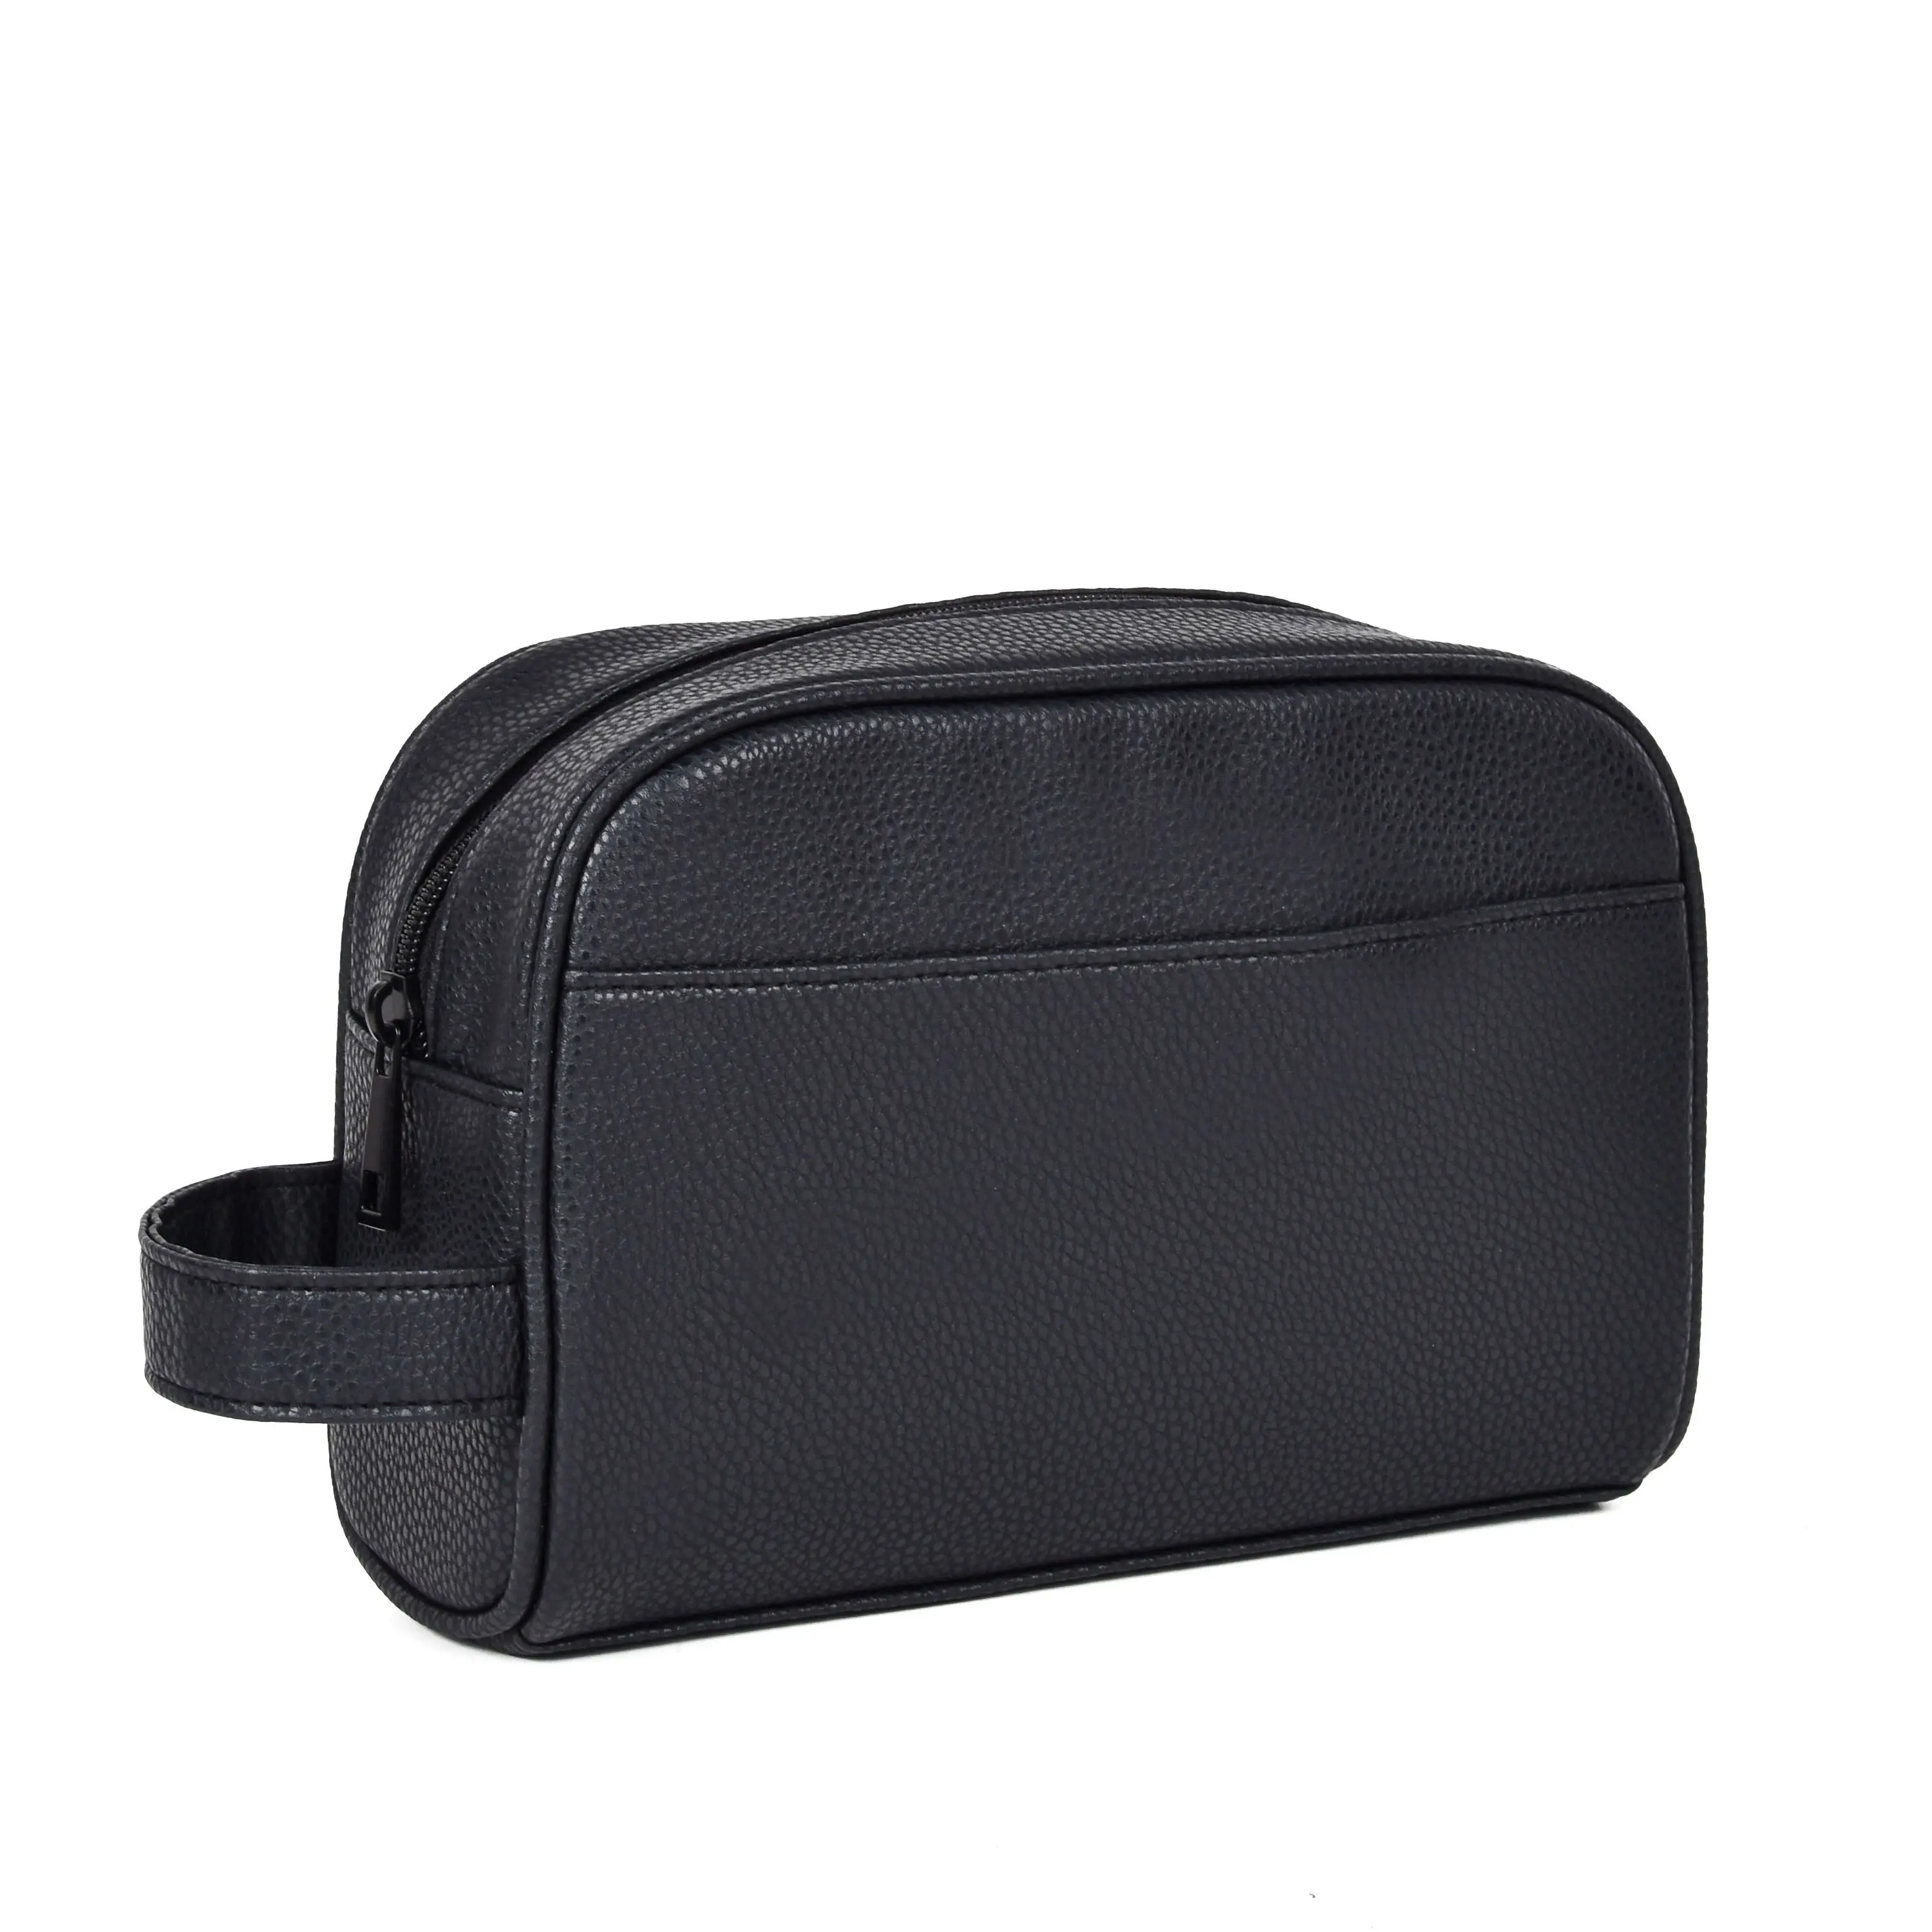 Yuhong PU Leather Make Up Pouch Cosmetic Bag Makeup Storage Box organizer Cosmetic Bag Leather Men Travel PU Cosmetic Bag